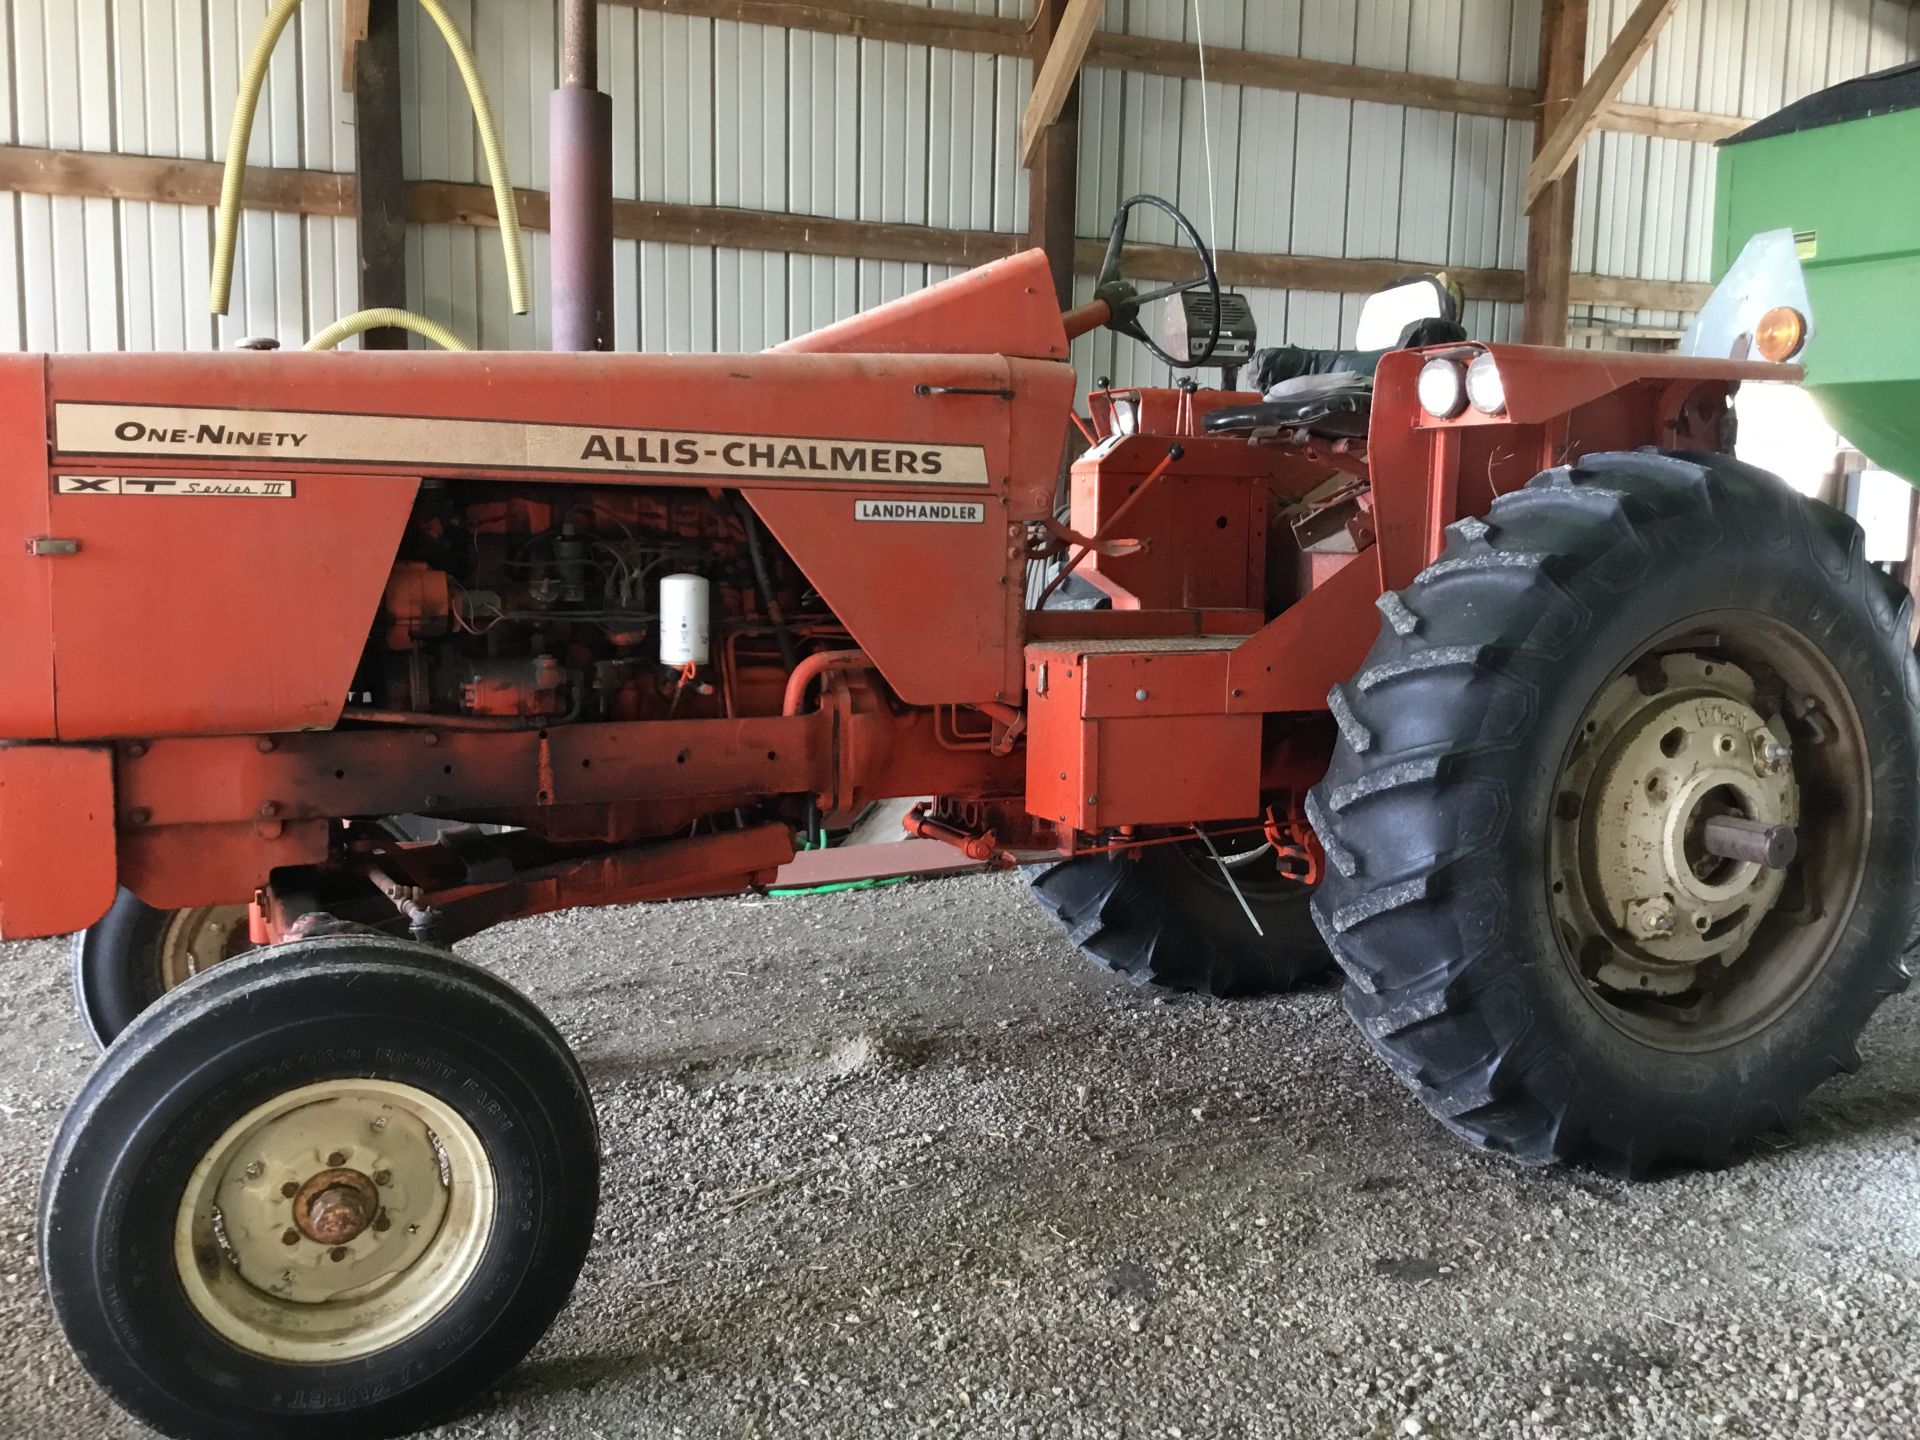 Allis Chalmers 190 XT Series 3, Gas, Wide Front, 3 Pt. Hitch, 16.9-34 Rear Tires, 7:50-16 Front